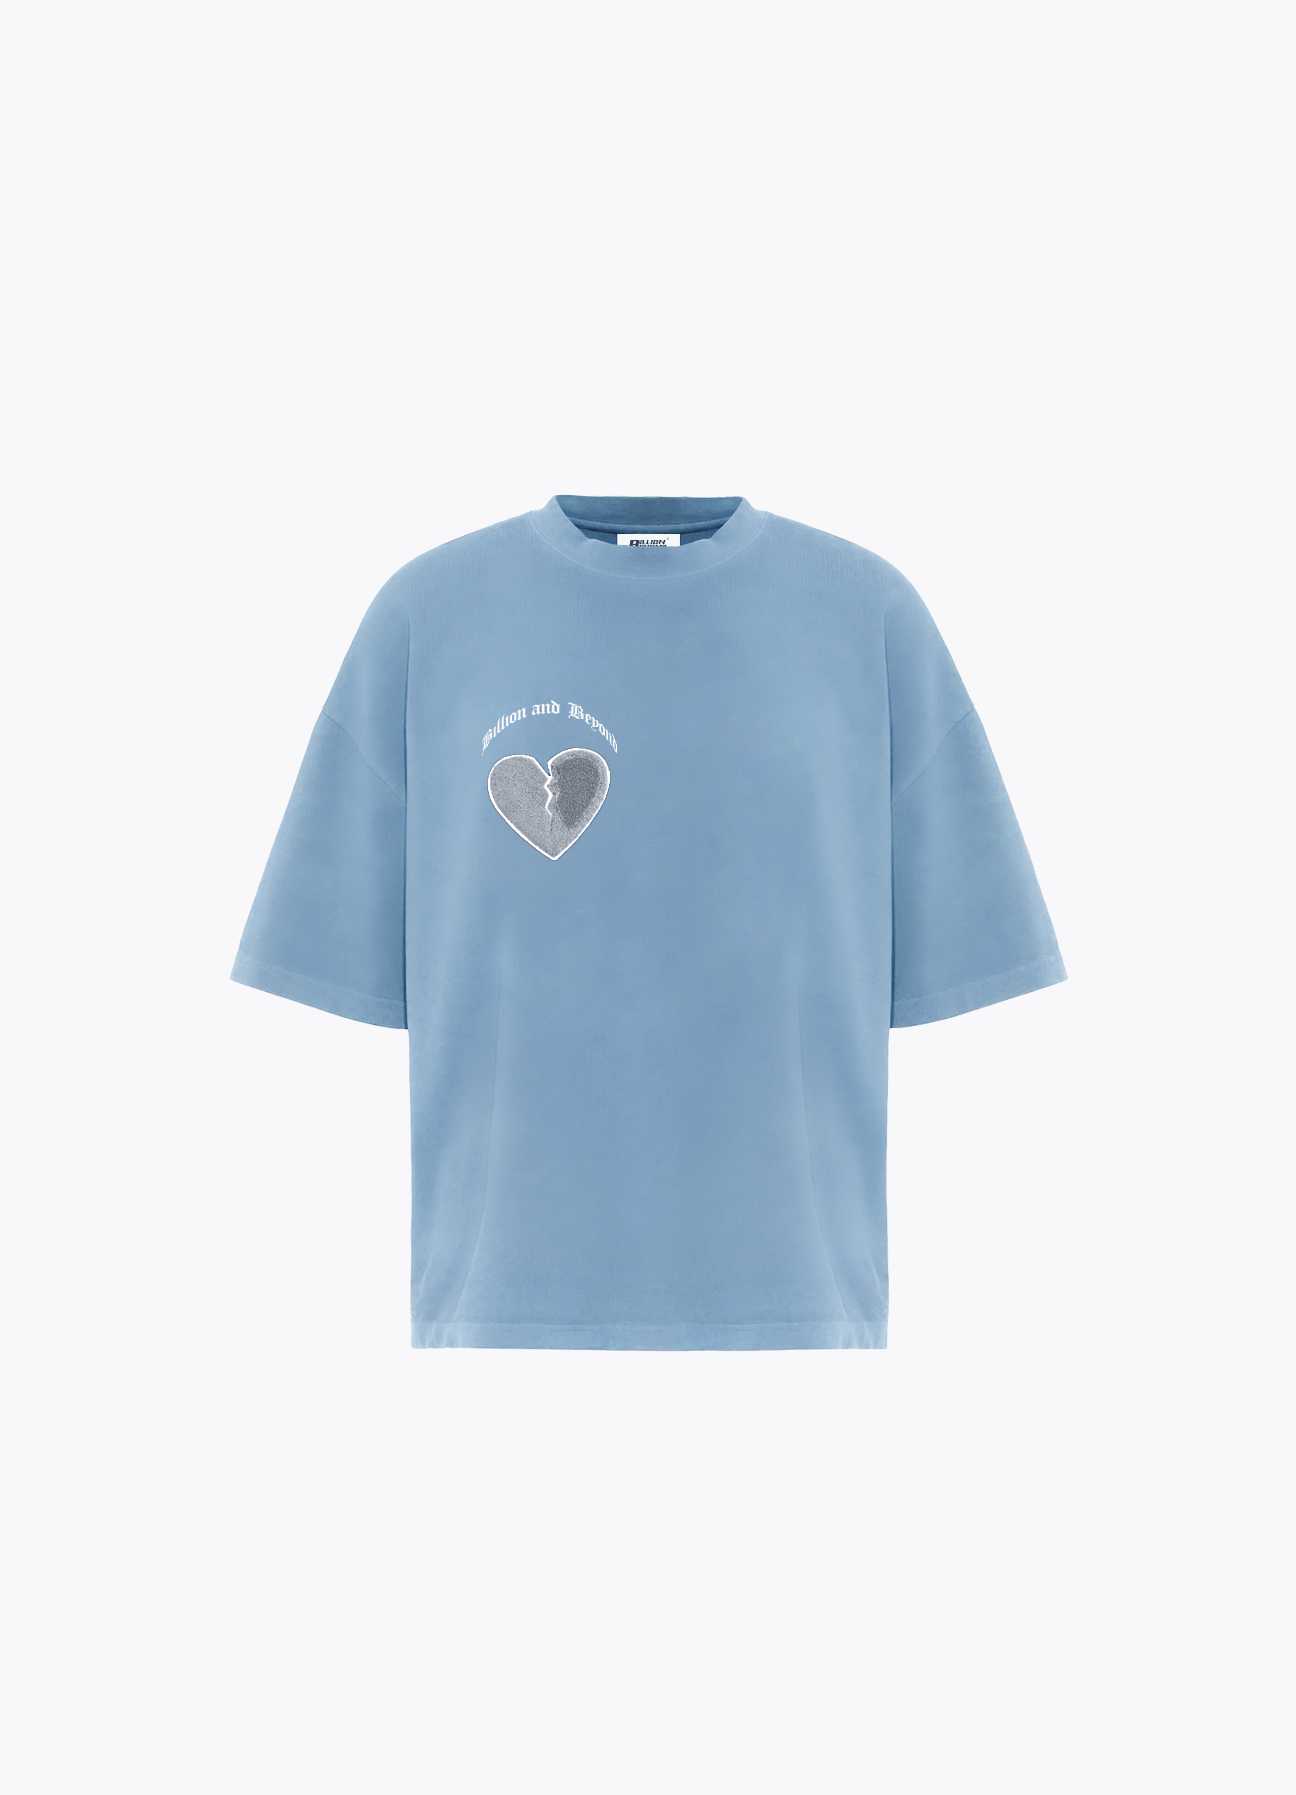 BILLION AND BEYOND - CRACK HEART TEE BABY BLUE